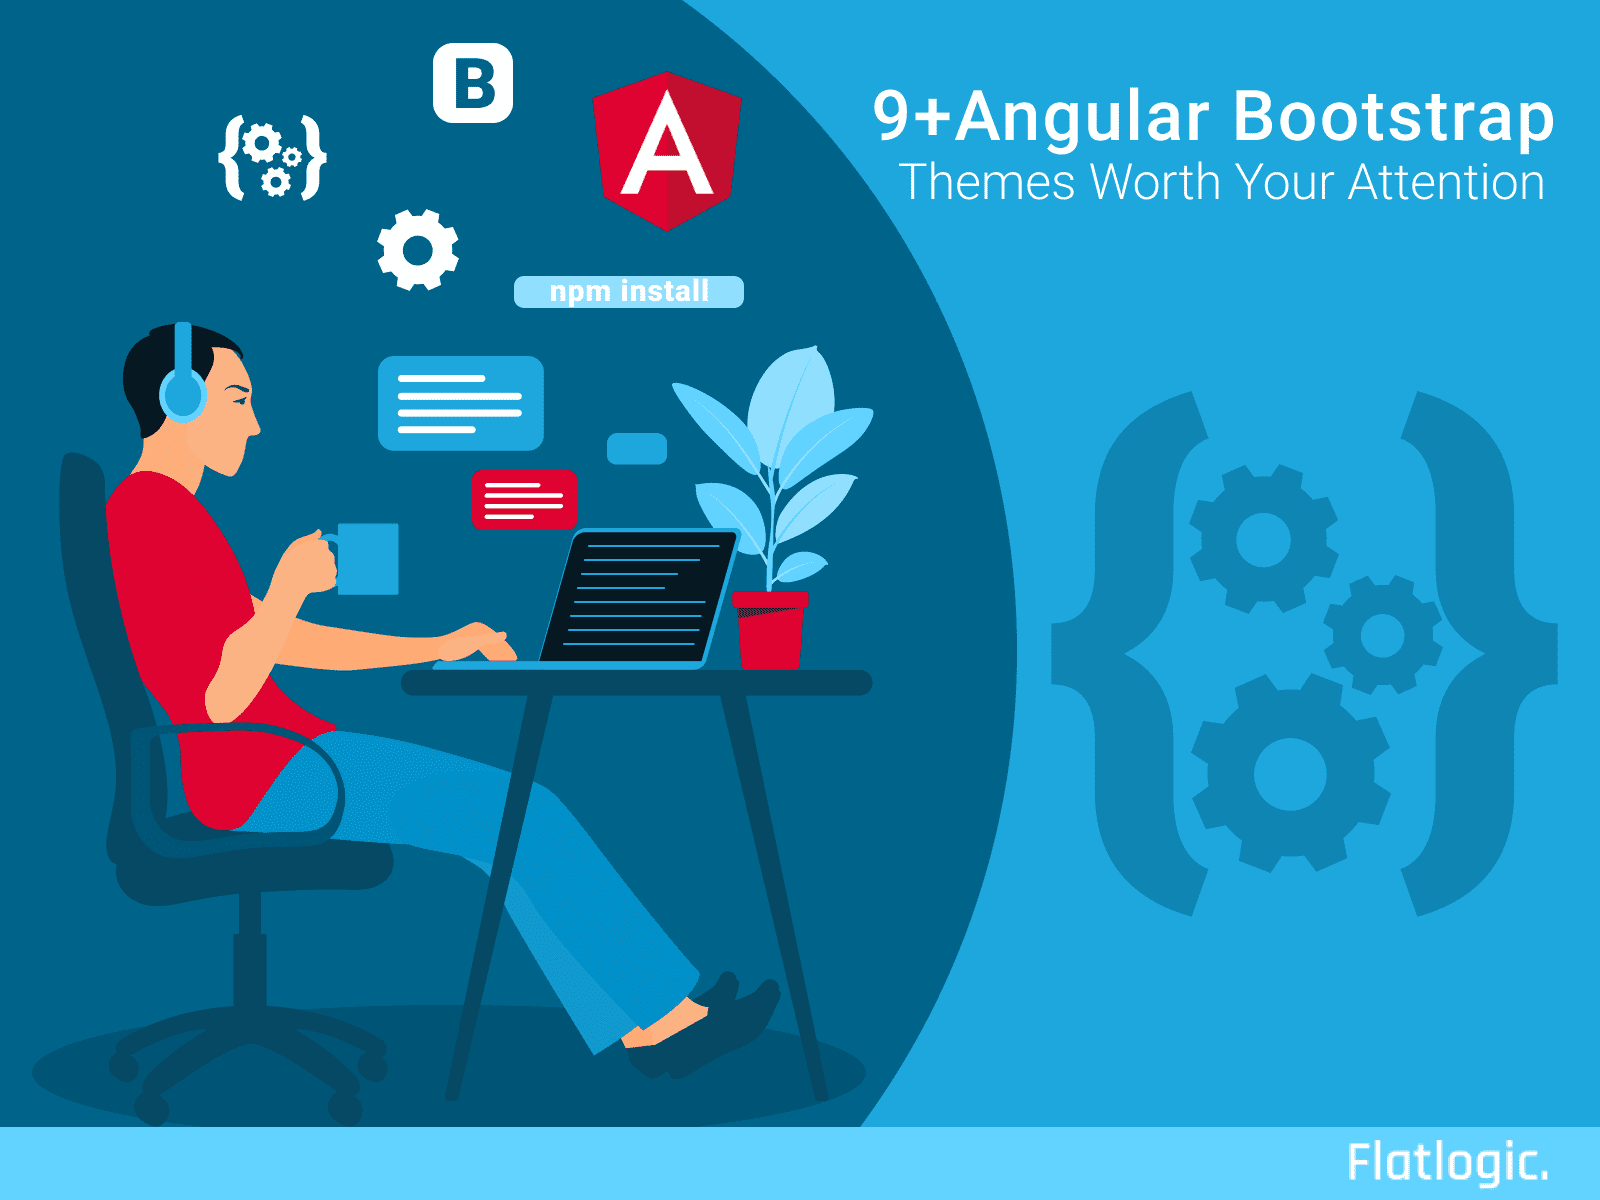 9+ Angular Bootstrap Themes Worth Your Attention